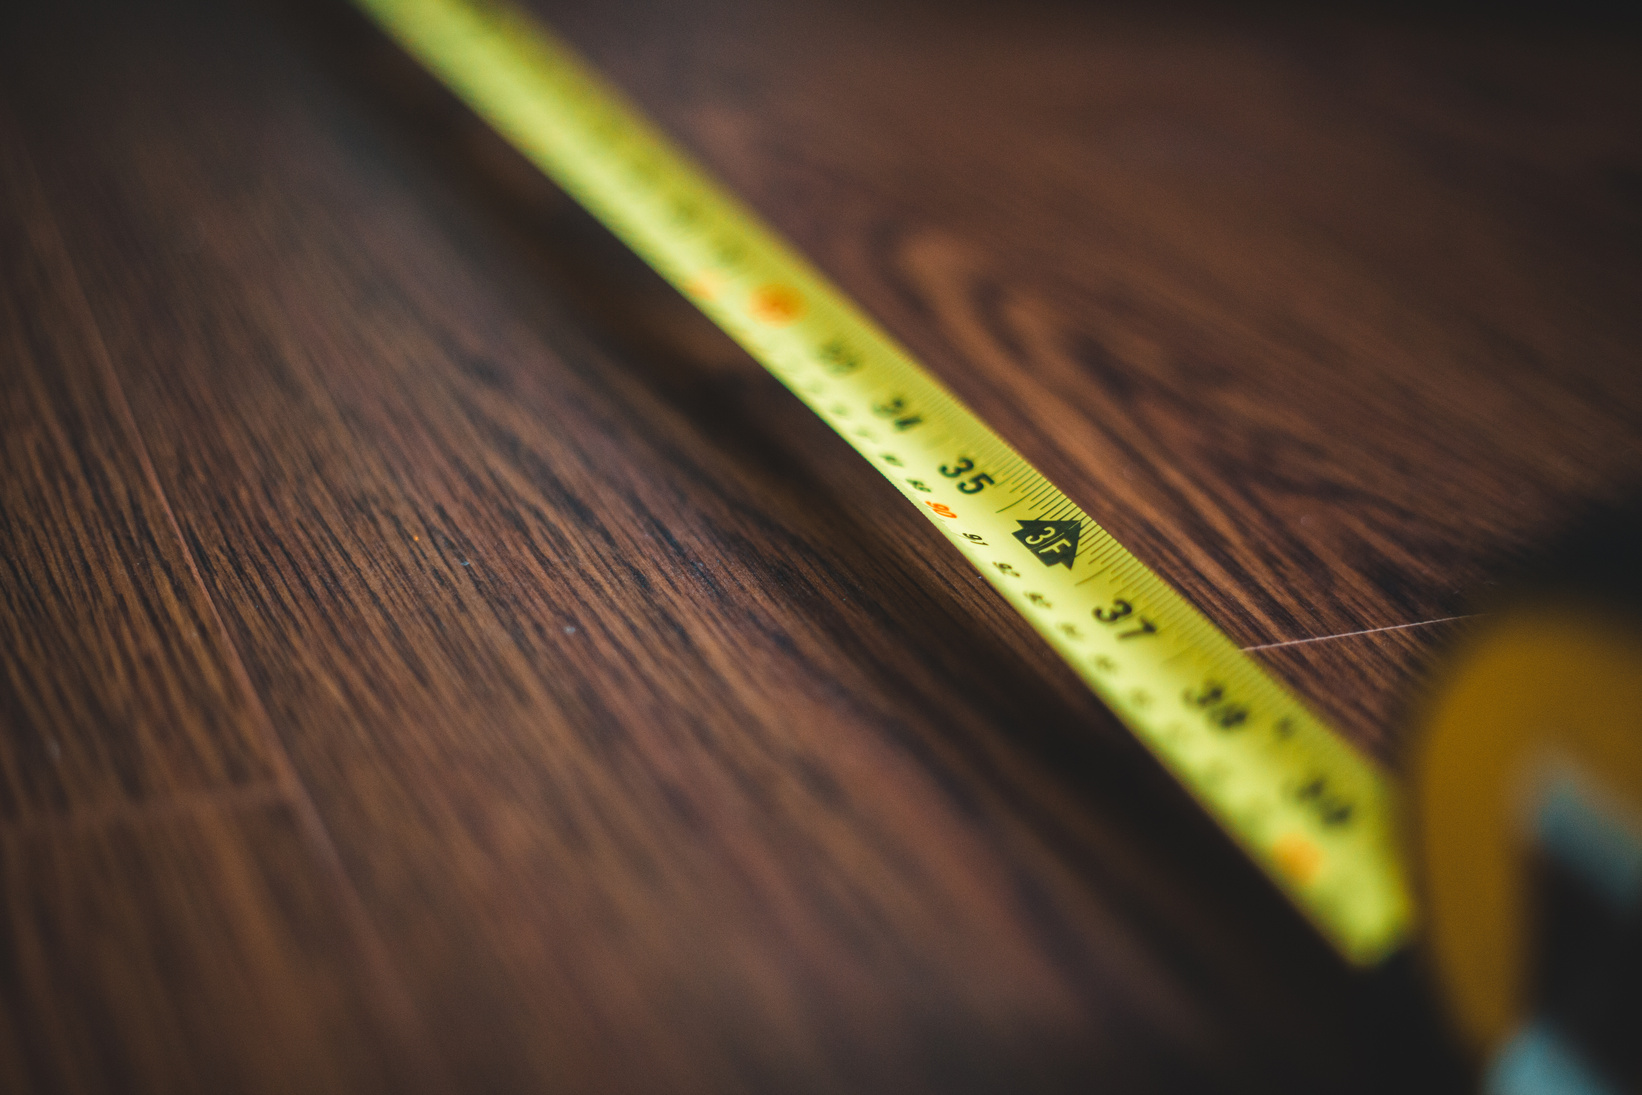 Close-Up Photo Of Measuring Tape